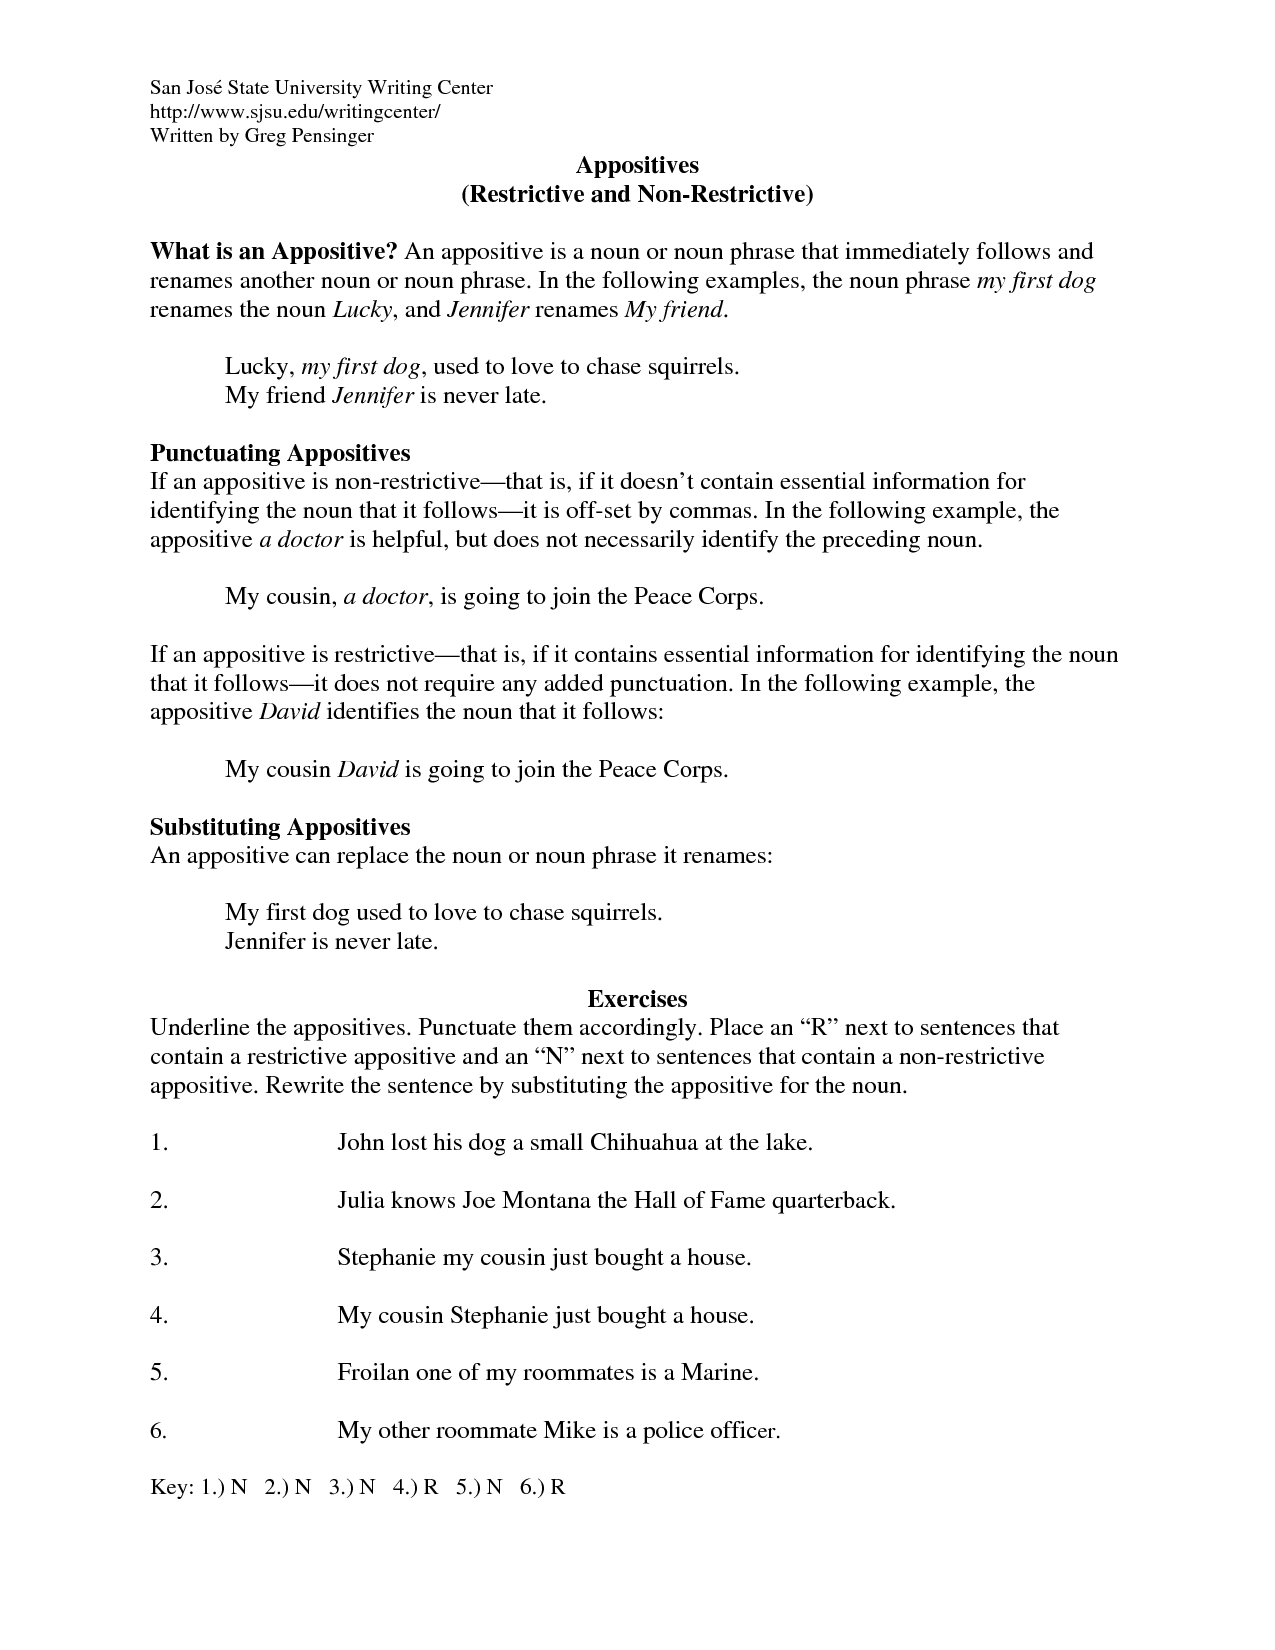 20-best-images-of-identifying-appositives-worksheets-appositive-phrase-sentence-examples